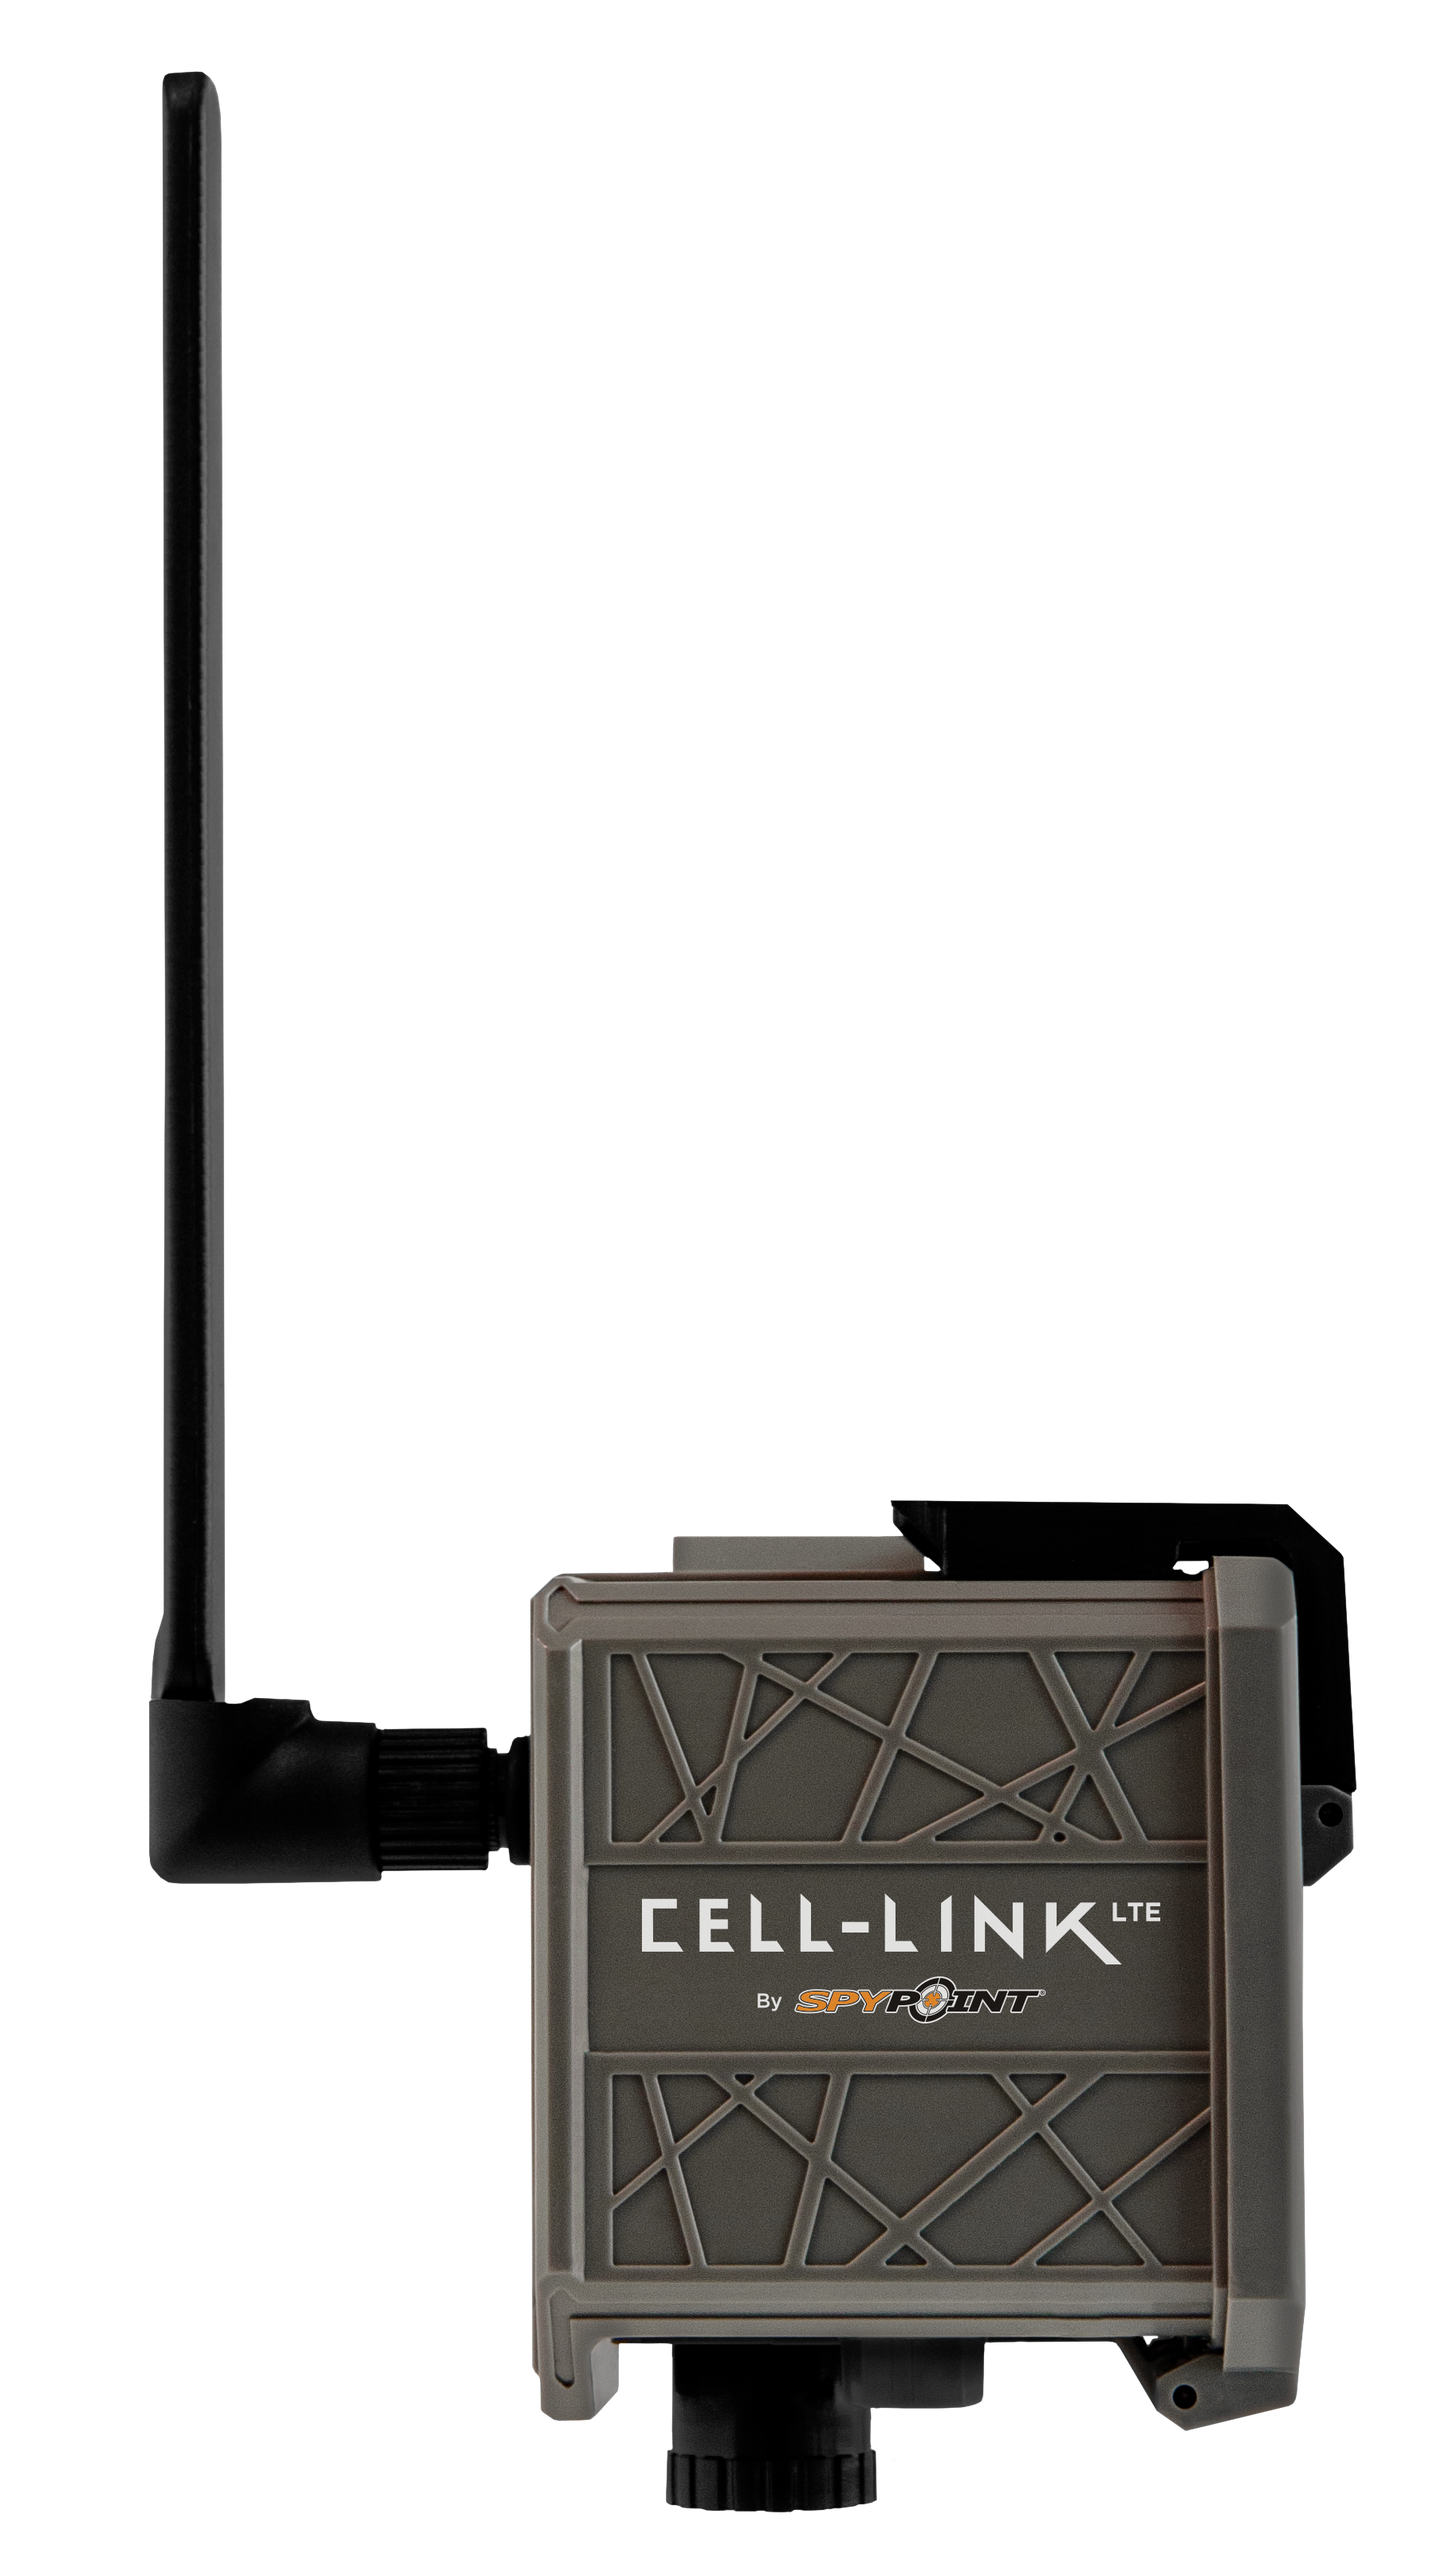 SPYPOINT® CELL-LINK